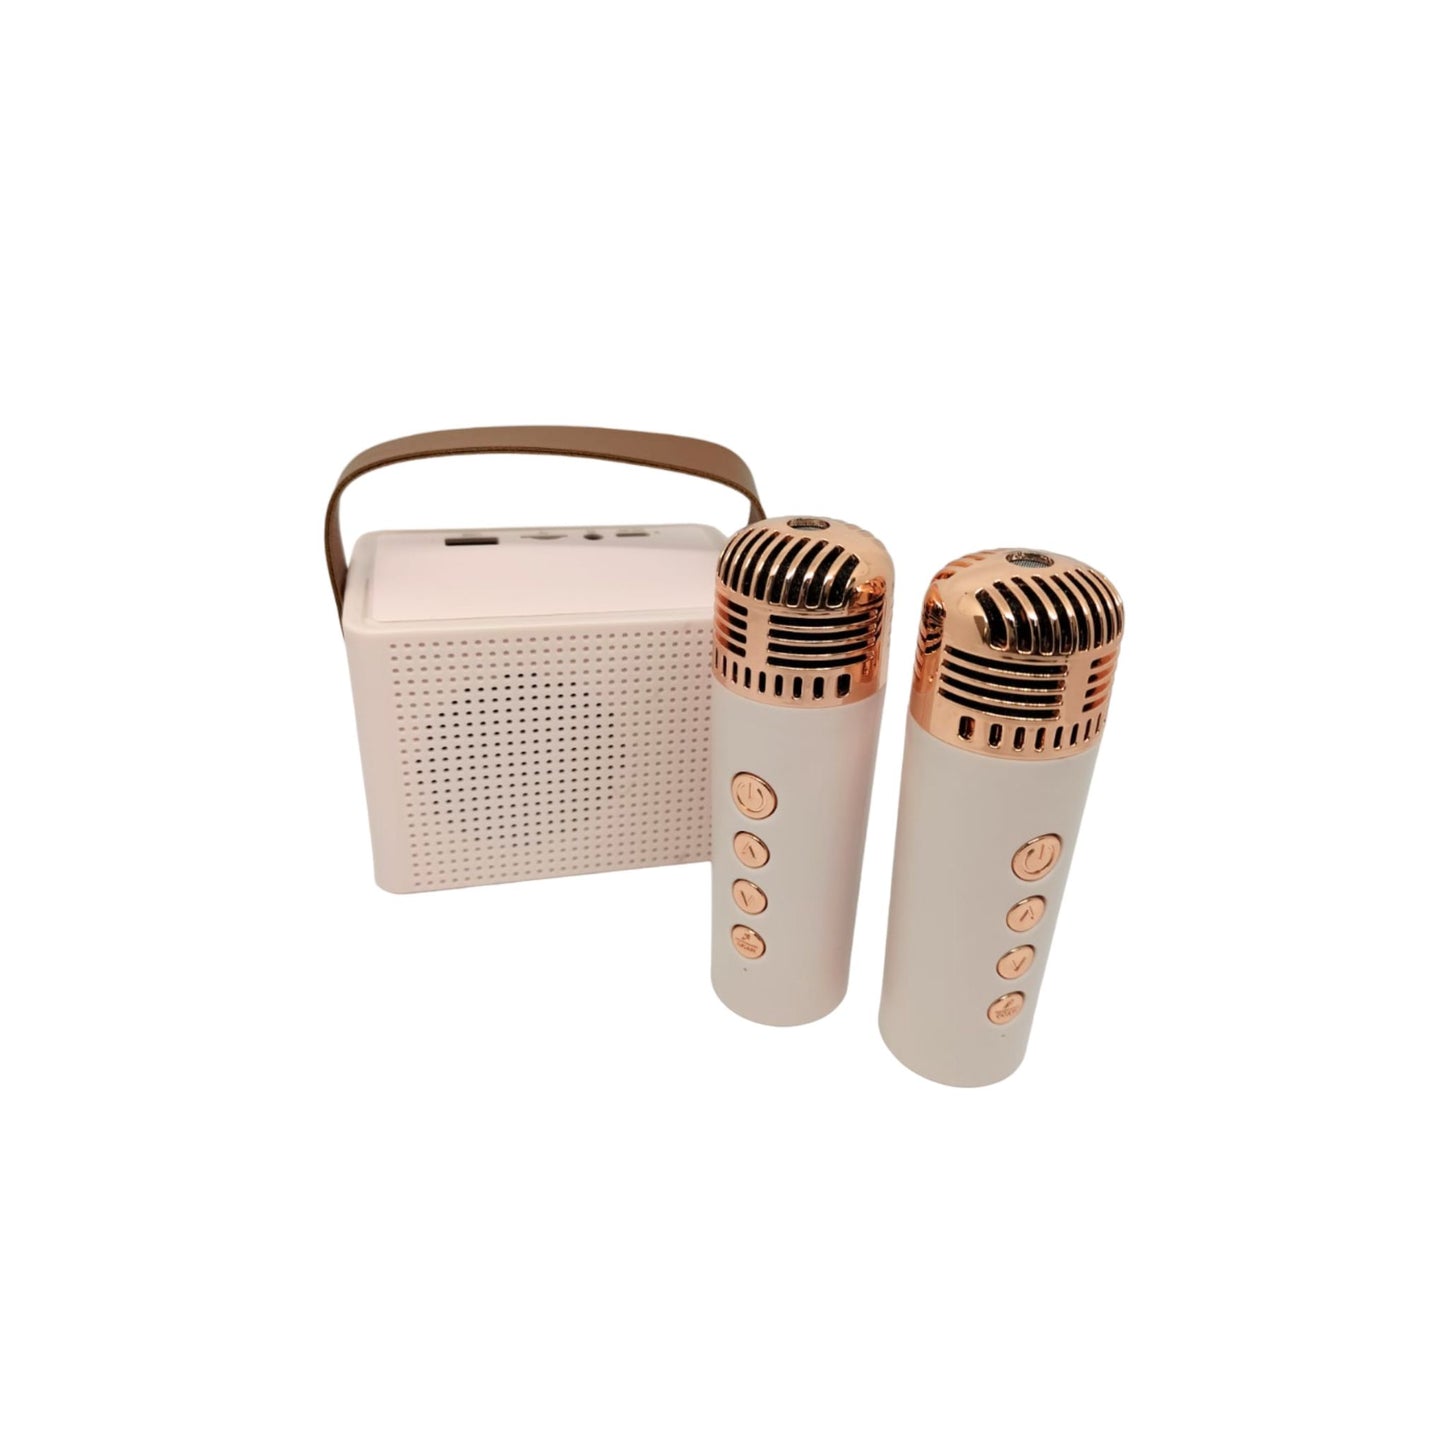 Bluetooth Karaoke Speaker with 2 Wireless Microphones PA Speaker System for ndoor Outdoor Party, Family Party Singing